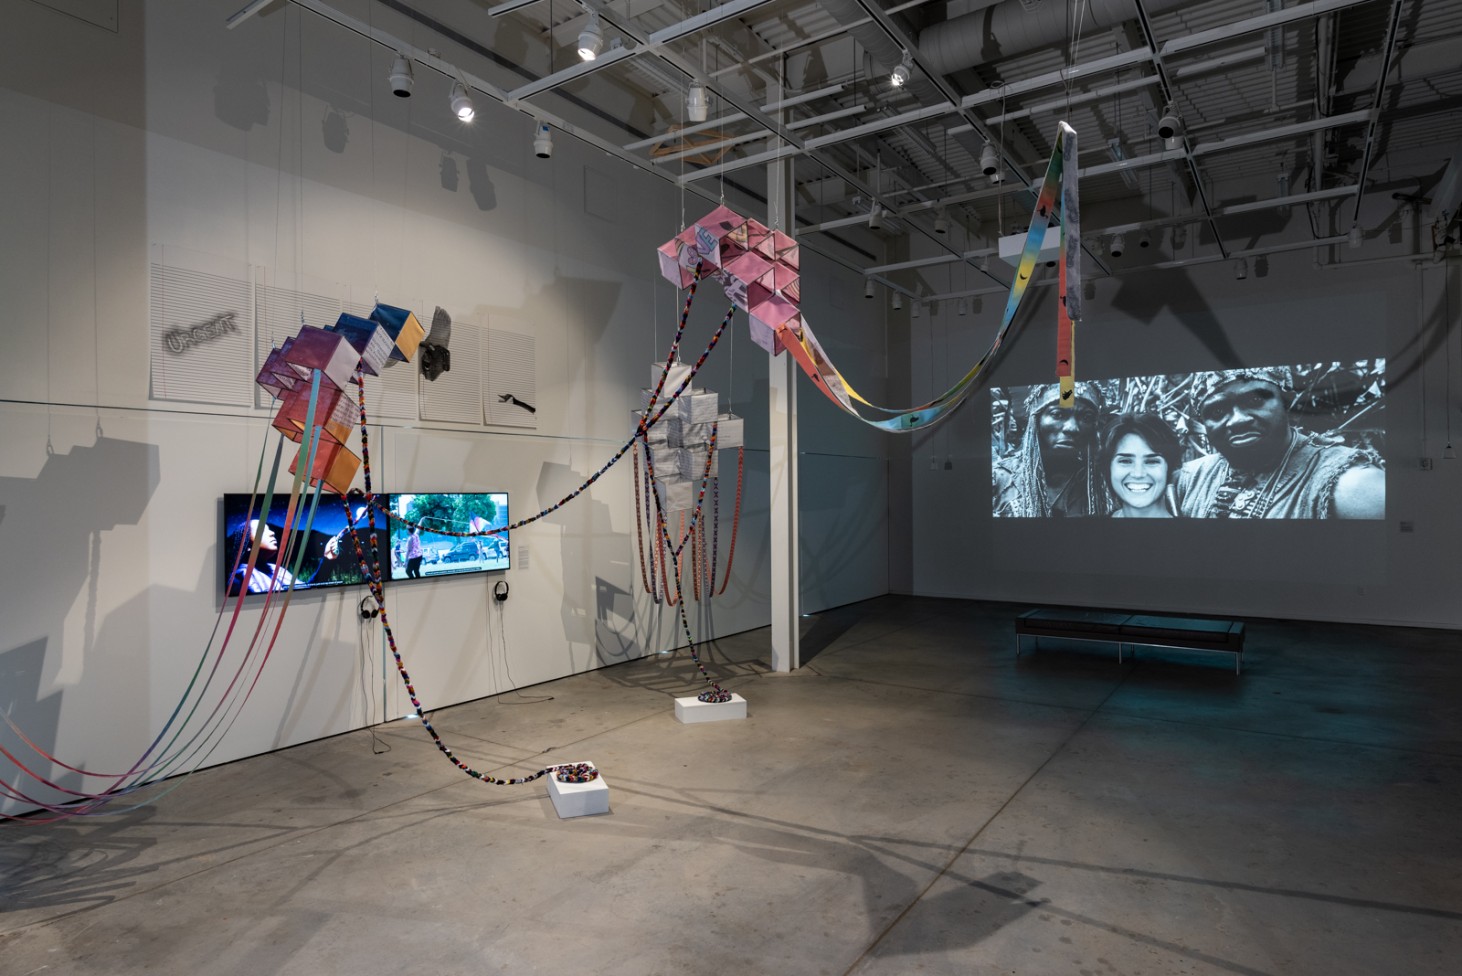 A photo of the Assemblage exhibit displays tv screens on the walls and colorful items hanging from the rafters inside a sparse, warehouse like space.